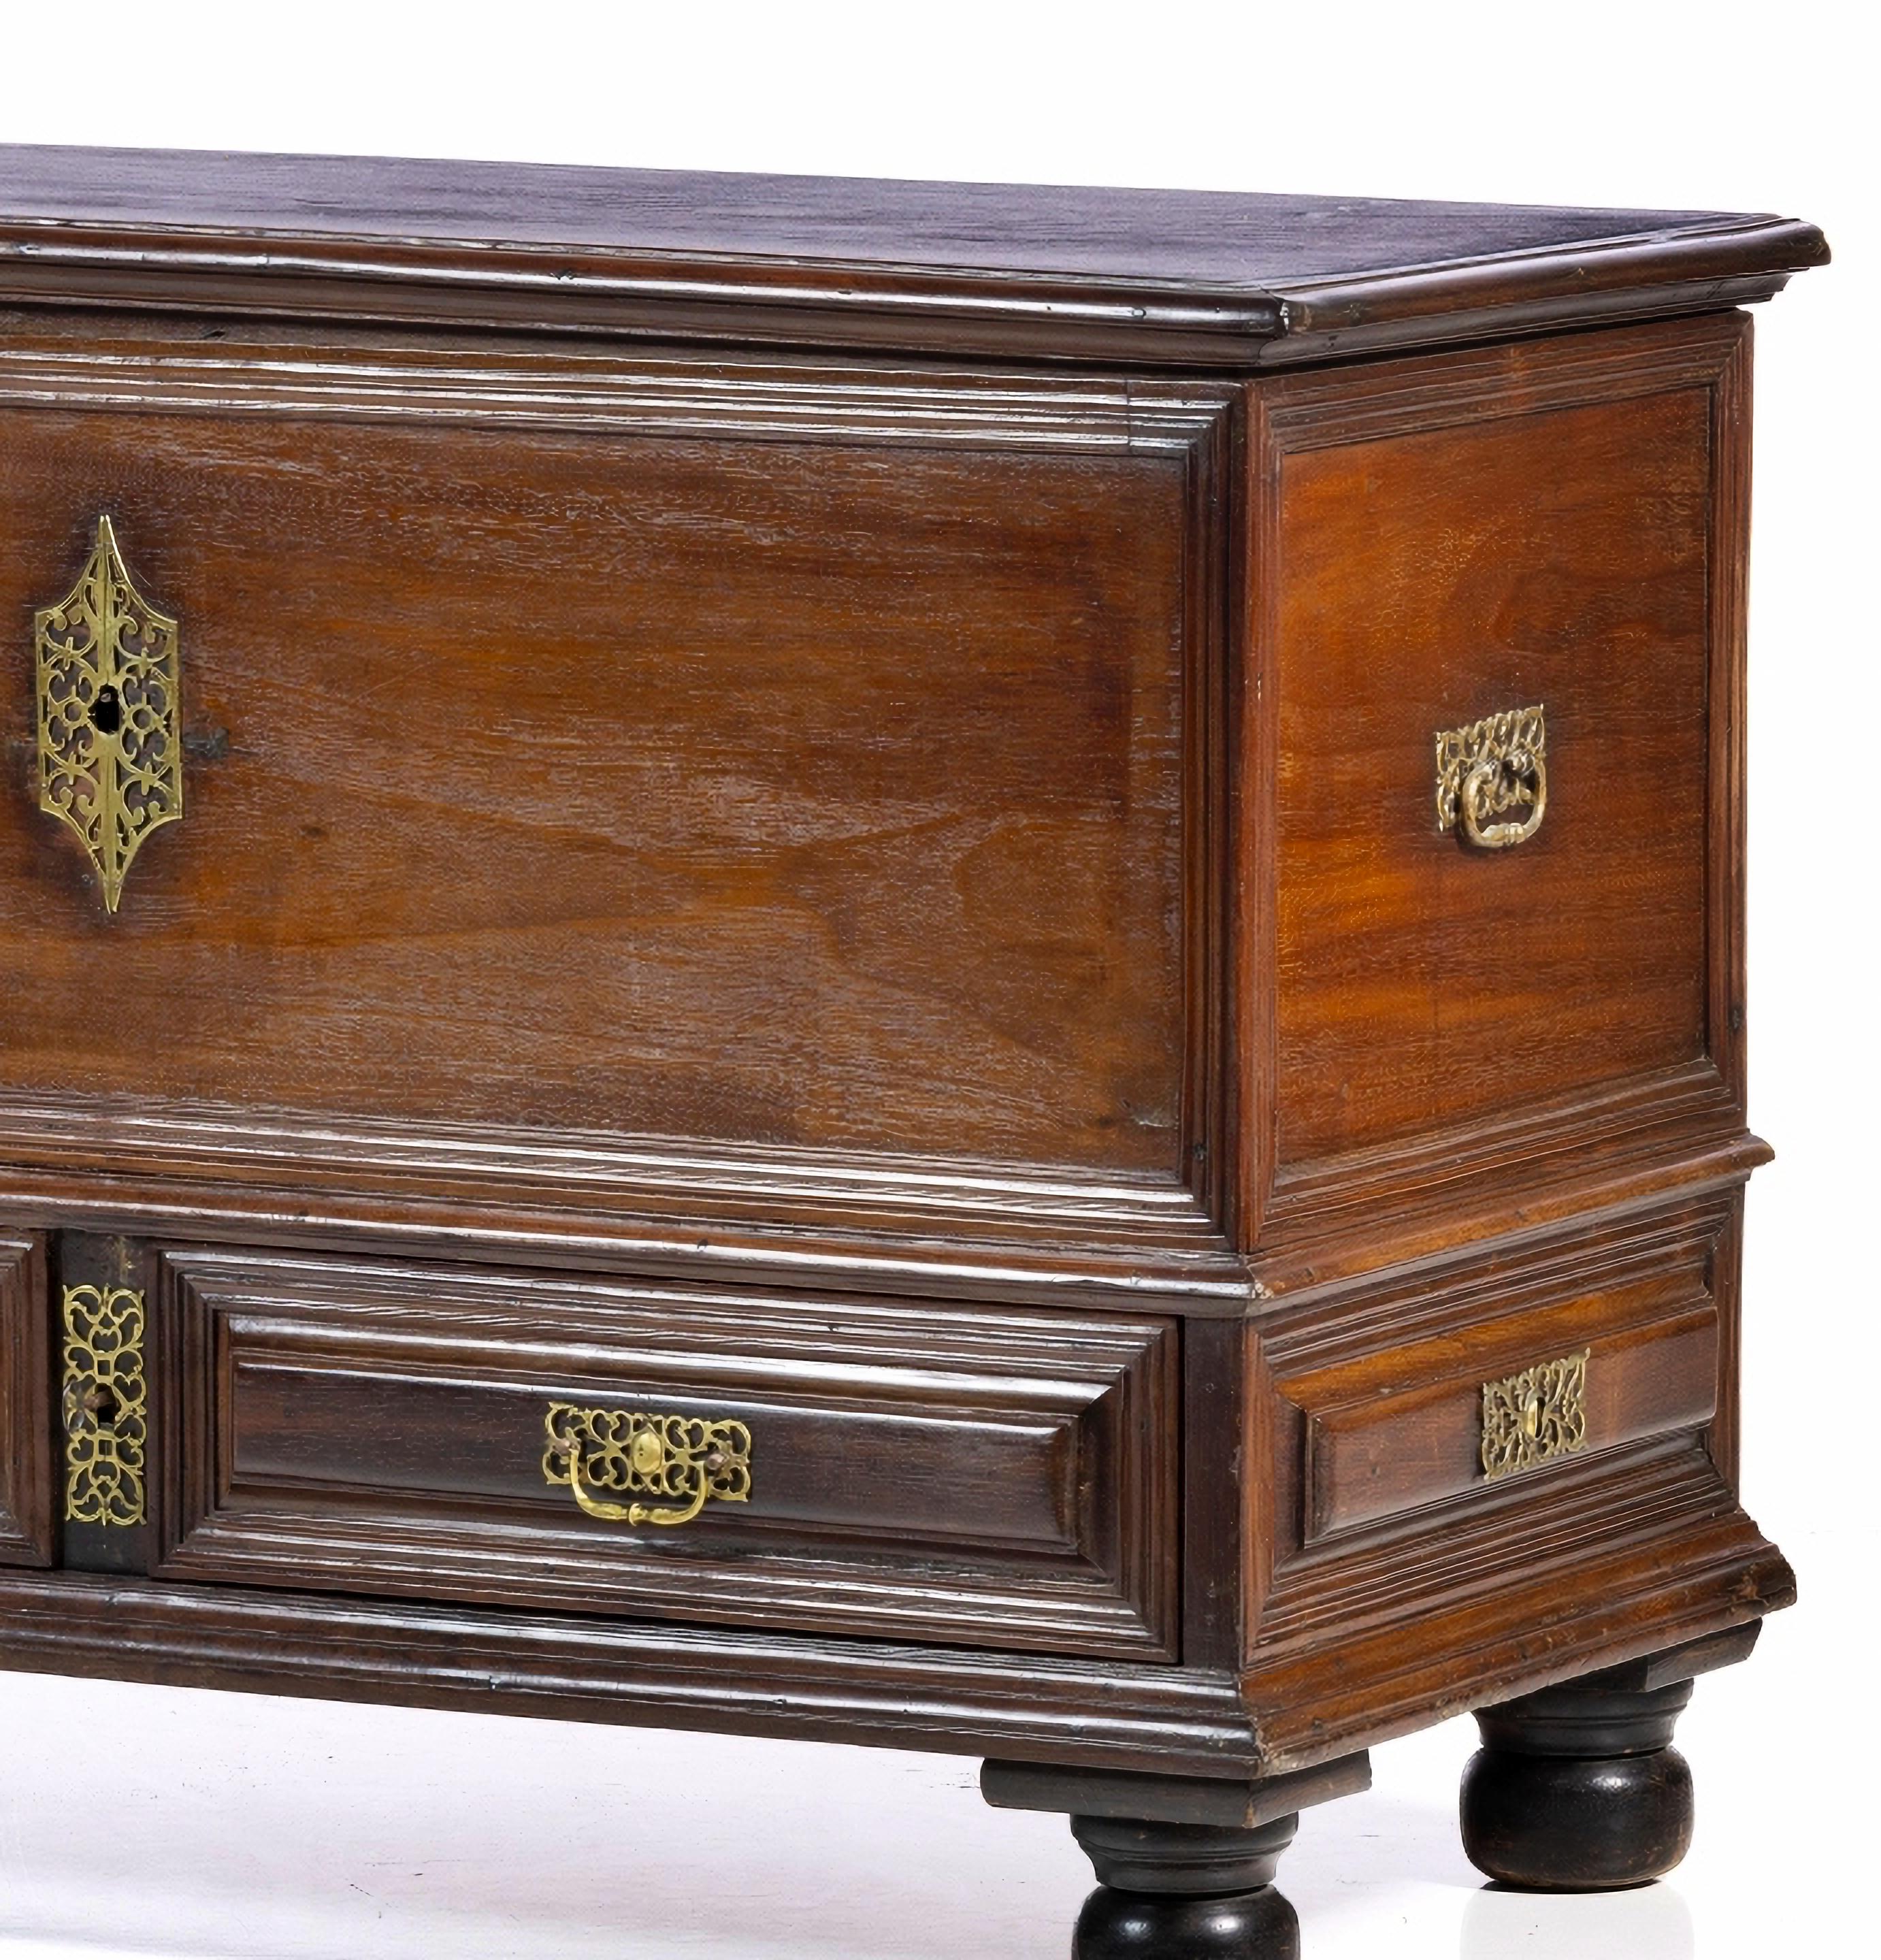 PORTUGUESE CHEST WITH TWO DRAWERS

18th Century
in vignette wood with rosewood frames.
Gold metal hardware.
Dim.: 82 x 122 x 60 cm
good conditions
